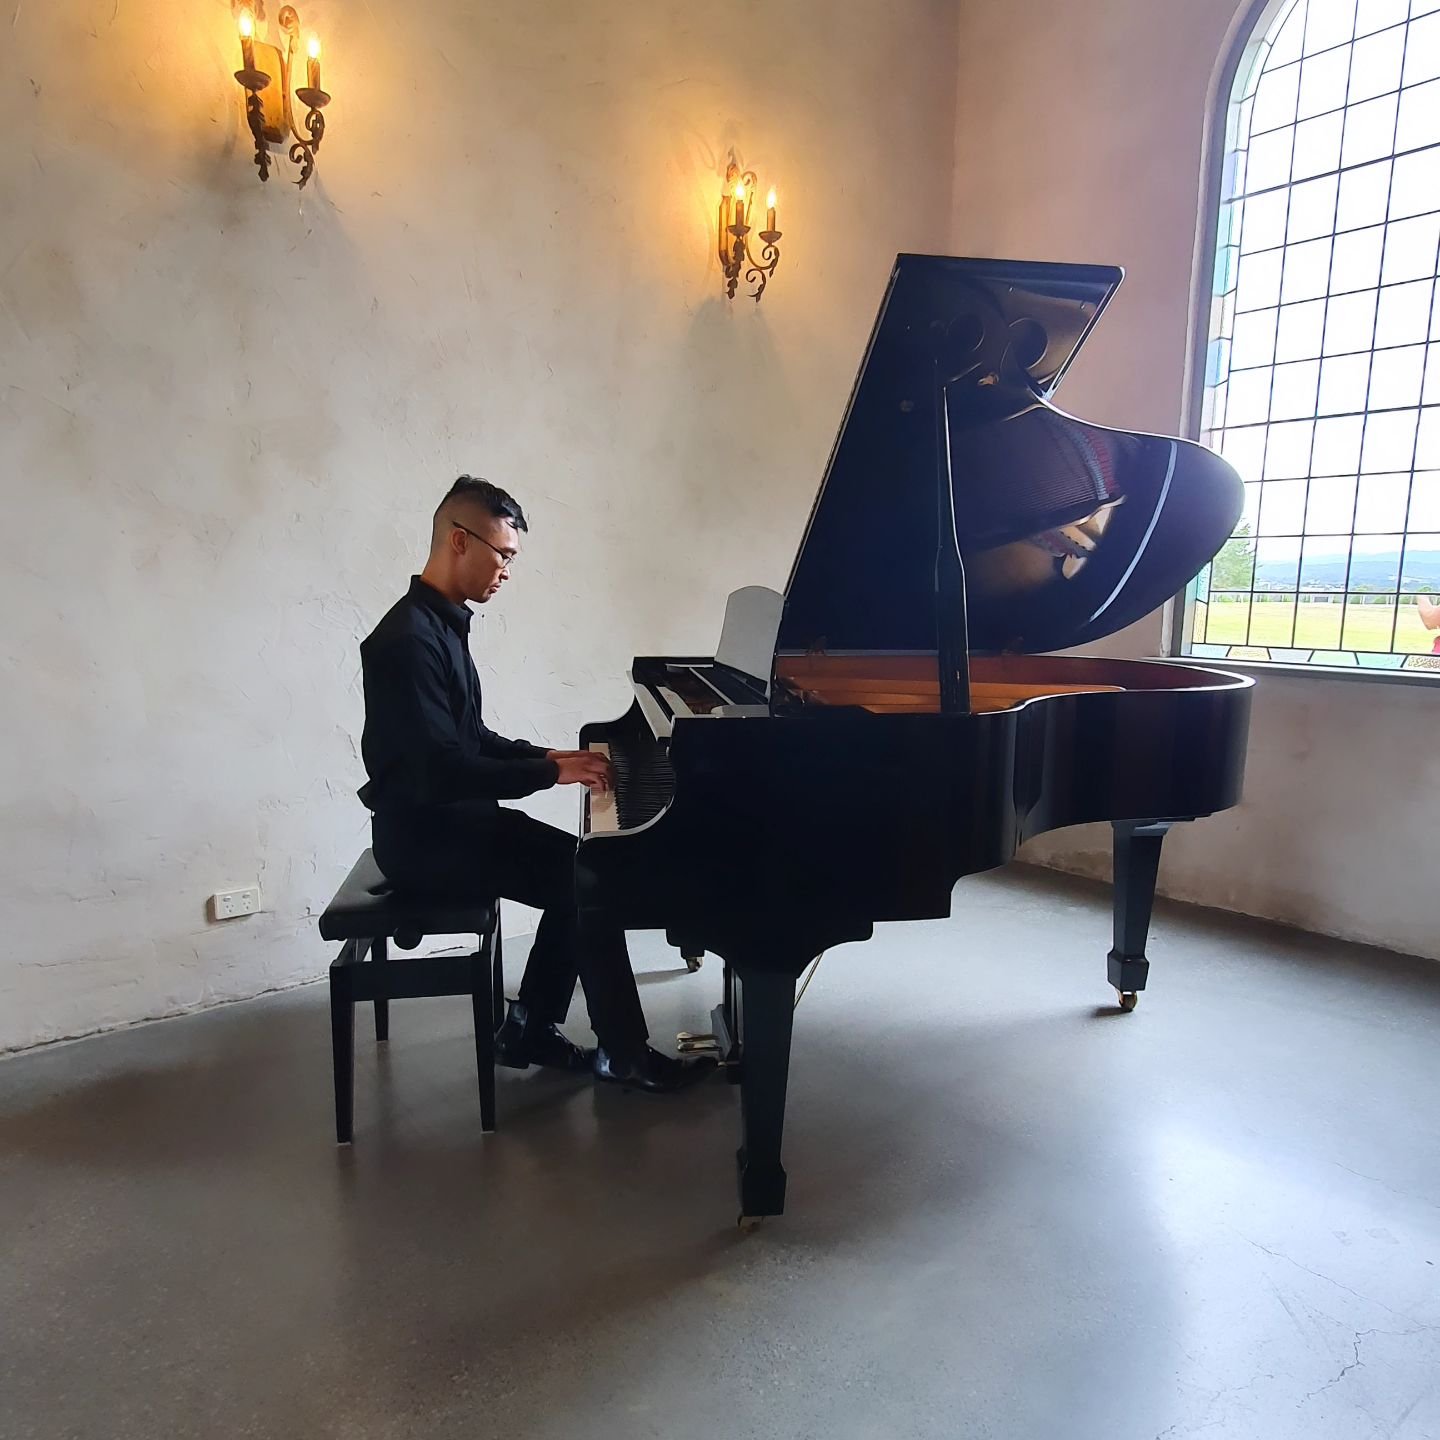 Throwback to a few months ago when I played at The Stones of the Yarra Valley.

If you are searching for a pianist who can create your own medley of songs for your wedding, then DM me today.

@stonesoftheyarravalley

#piano #pianist #pianists #instap